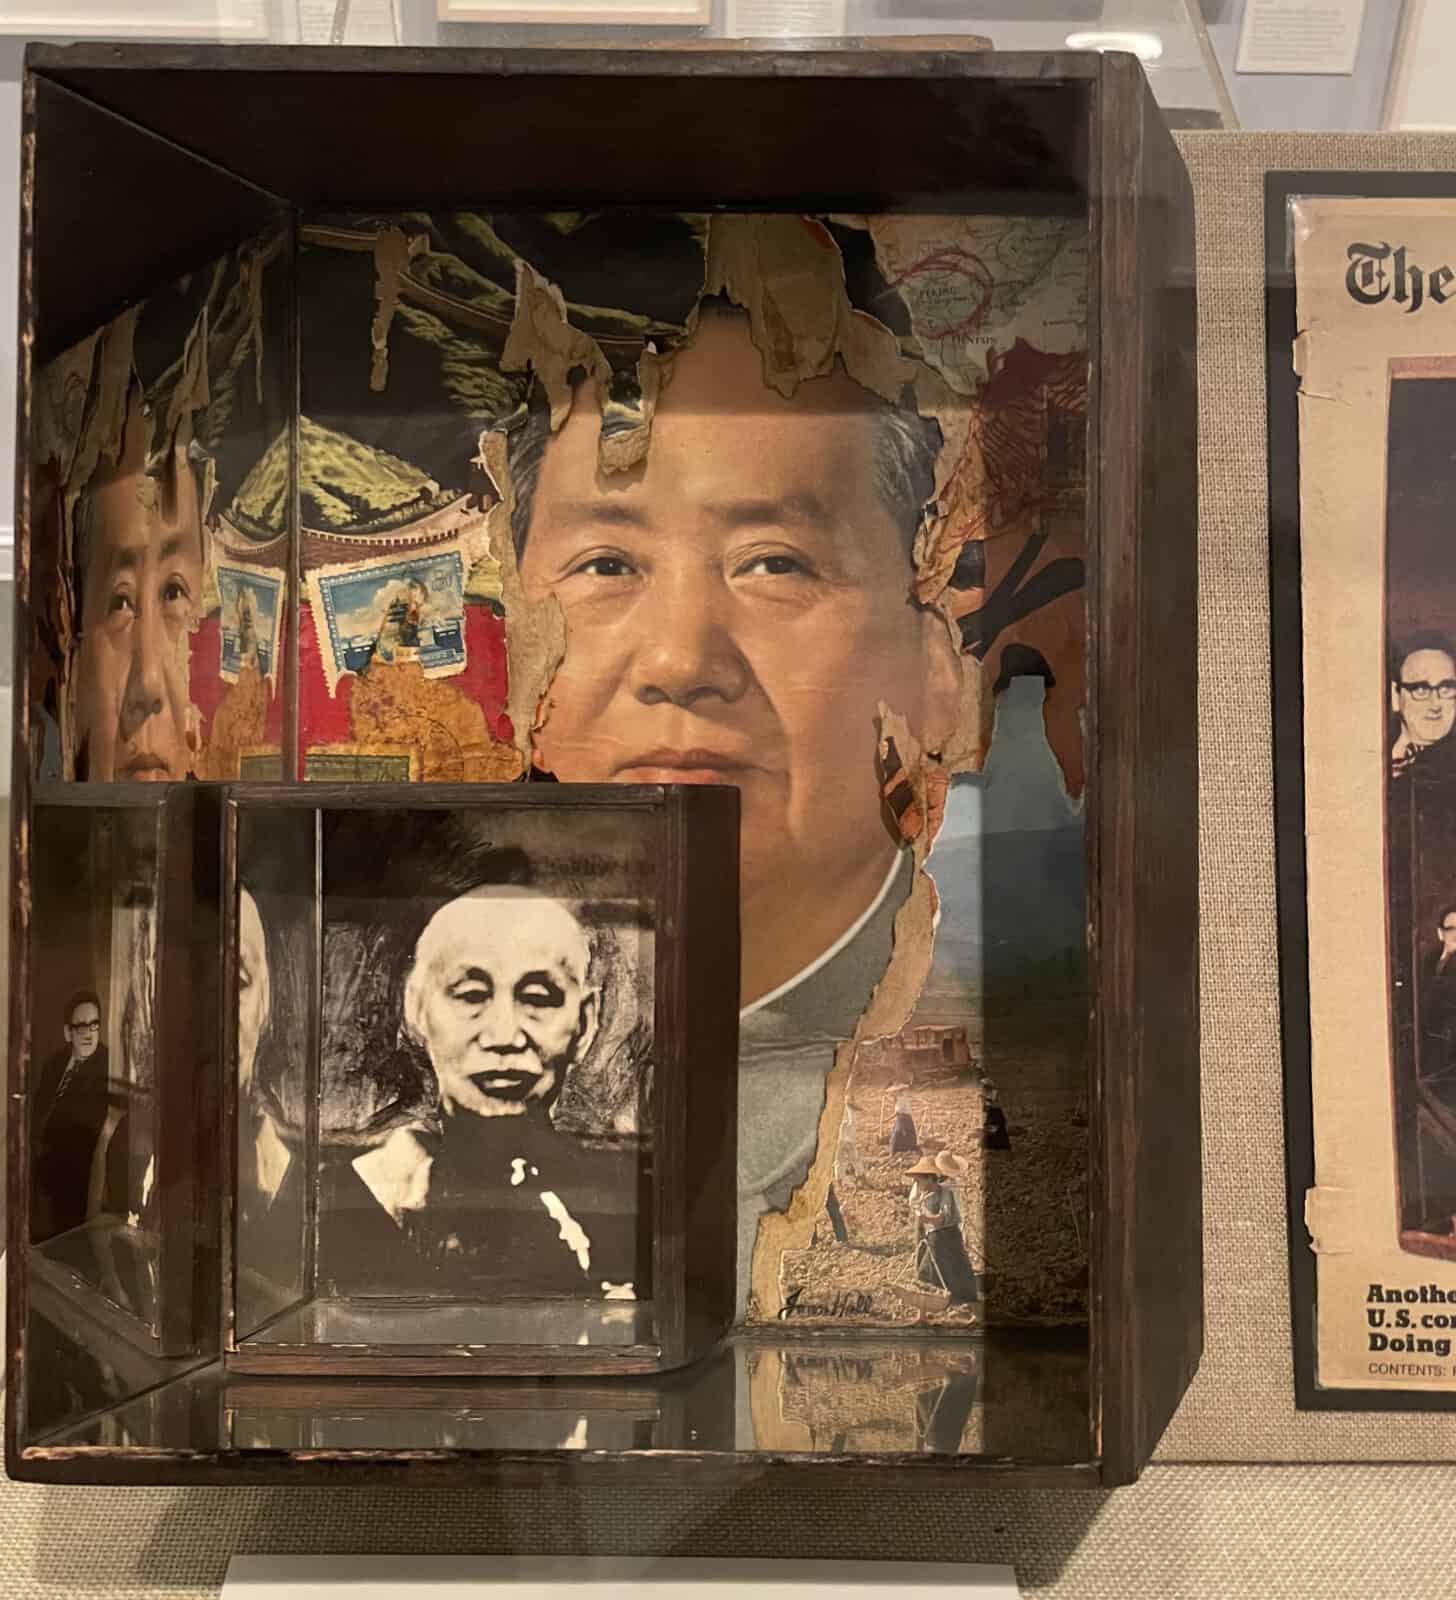 Joan Hall's collage artwork, 'Another U.S. Committment: Doing it with mirrors,' explores changing leadership in China, in an image that appeared on the front page of the New York Times in 1975.Press image courtesy of the Norman Rockwell Museum